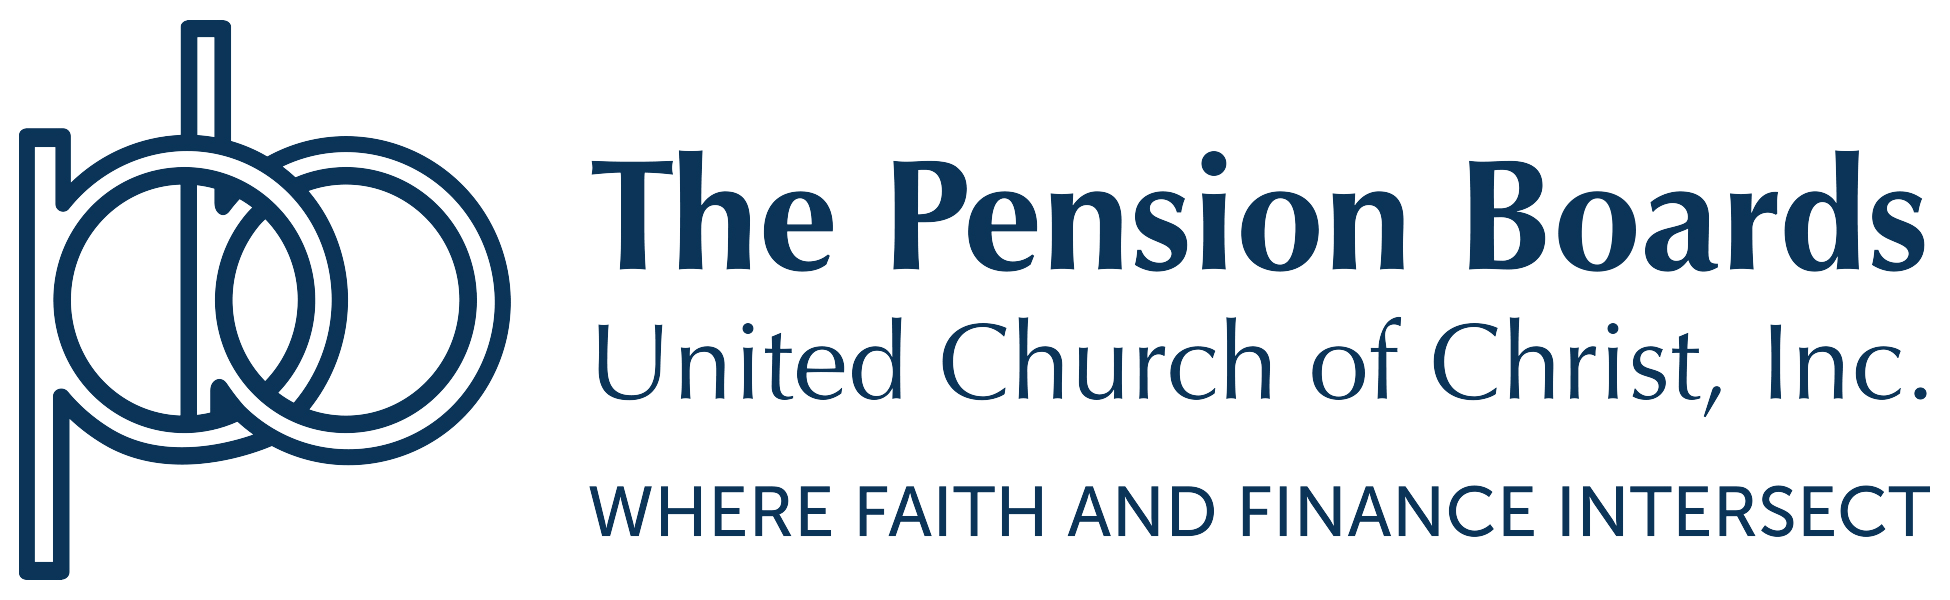 The Pension Boards United Church of Christ Company Logo